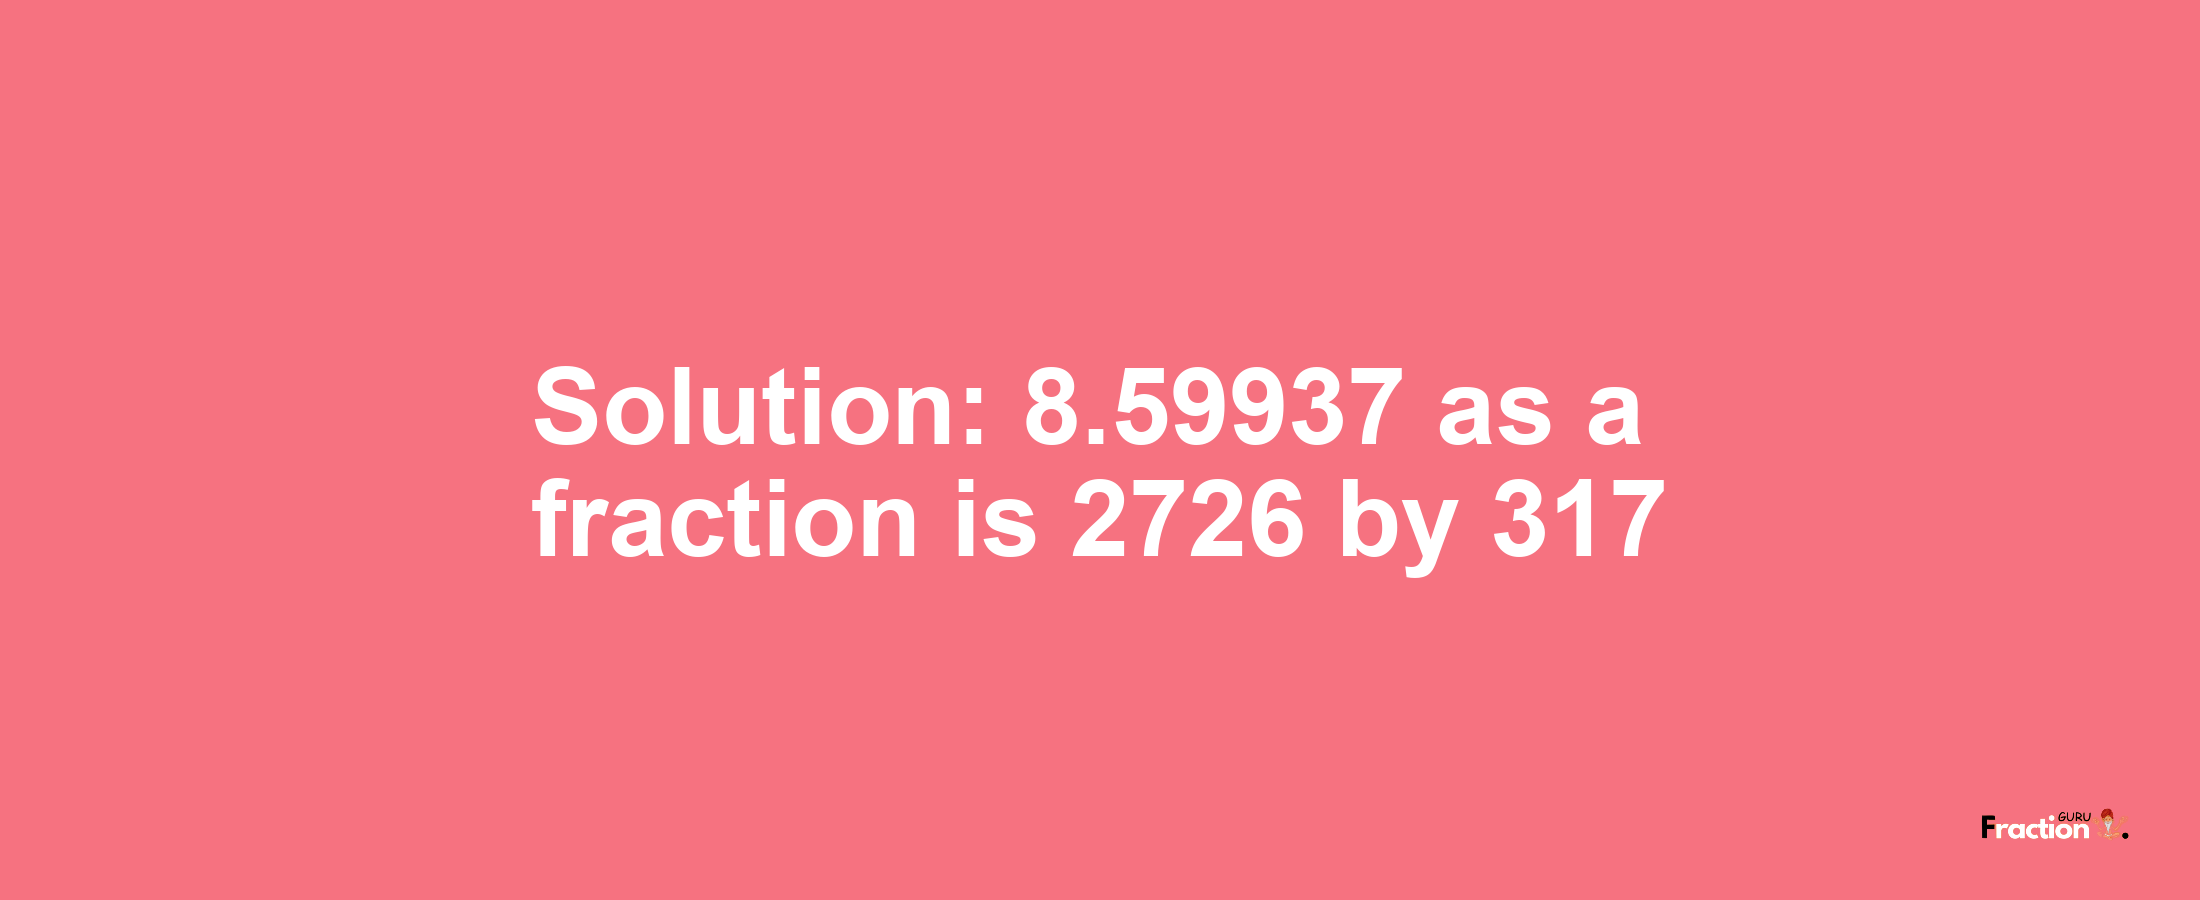 Solution:8.59937 as a fraction is 2726/317